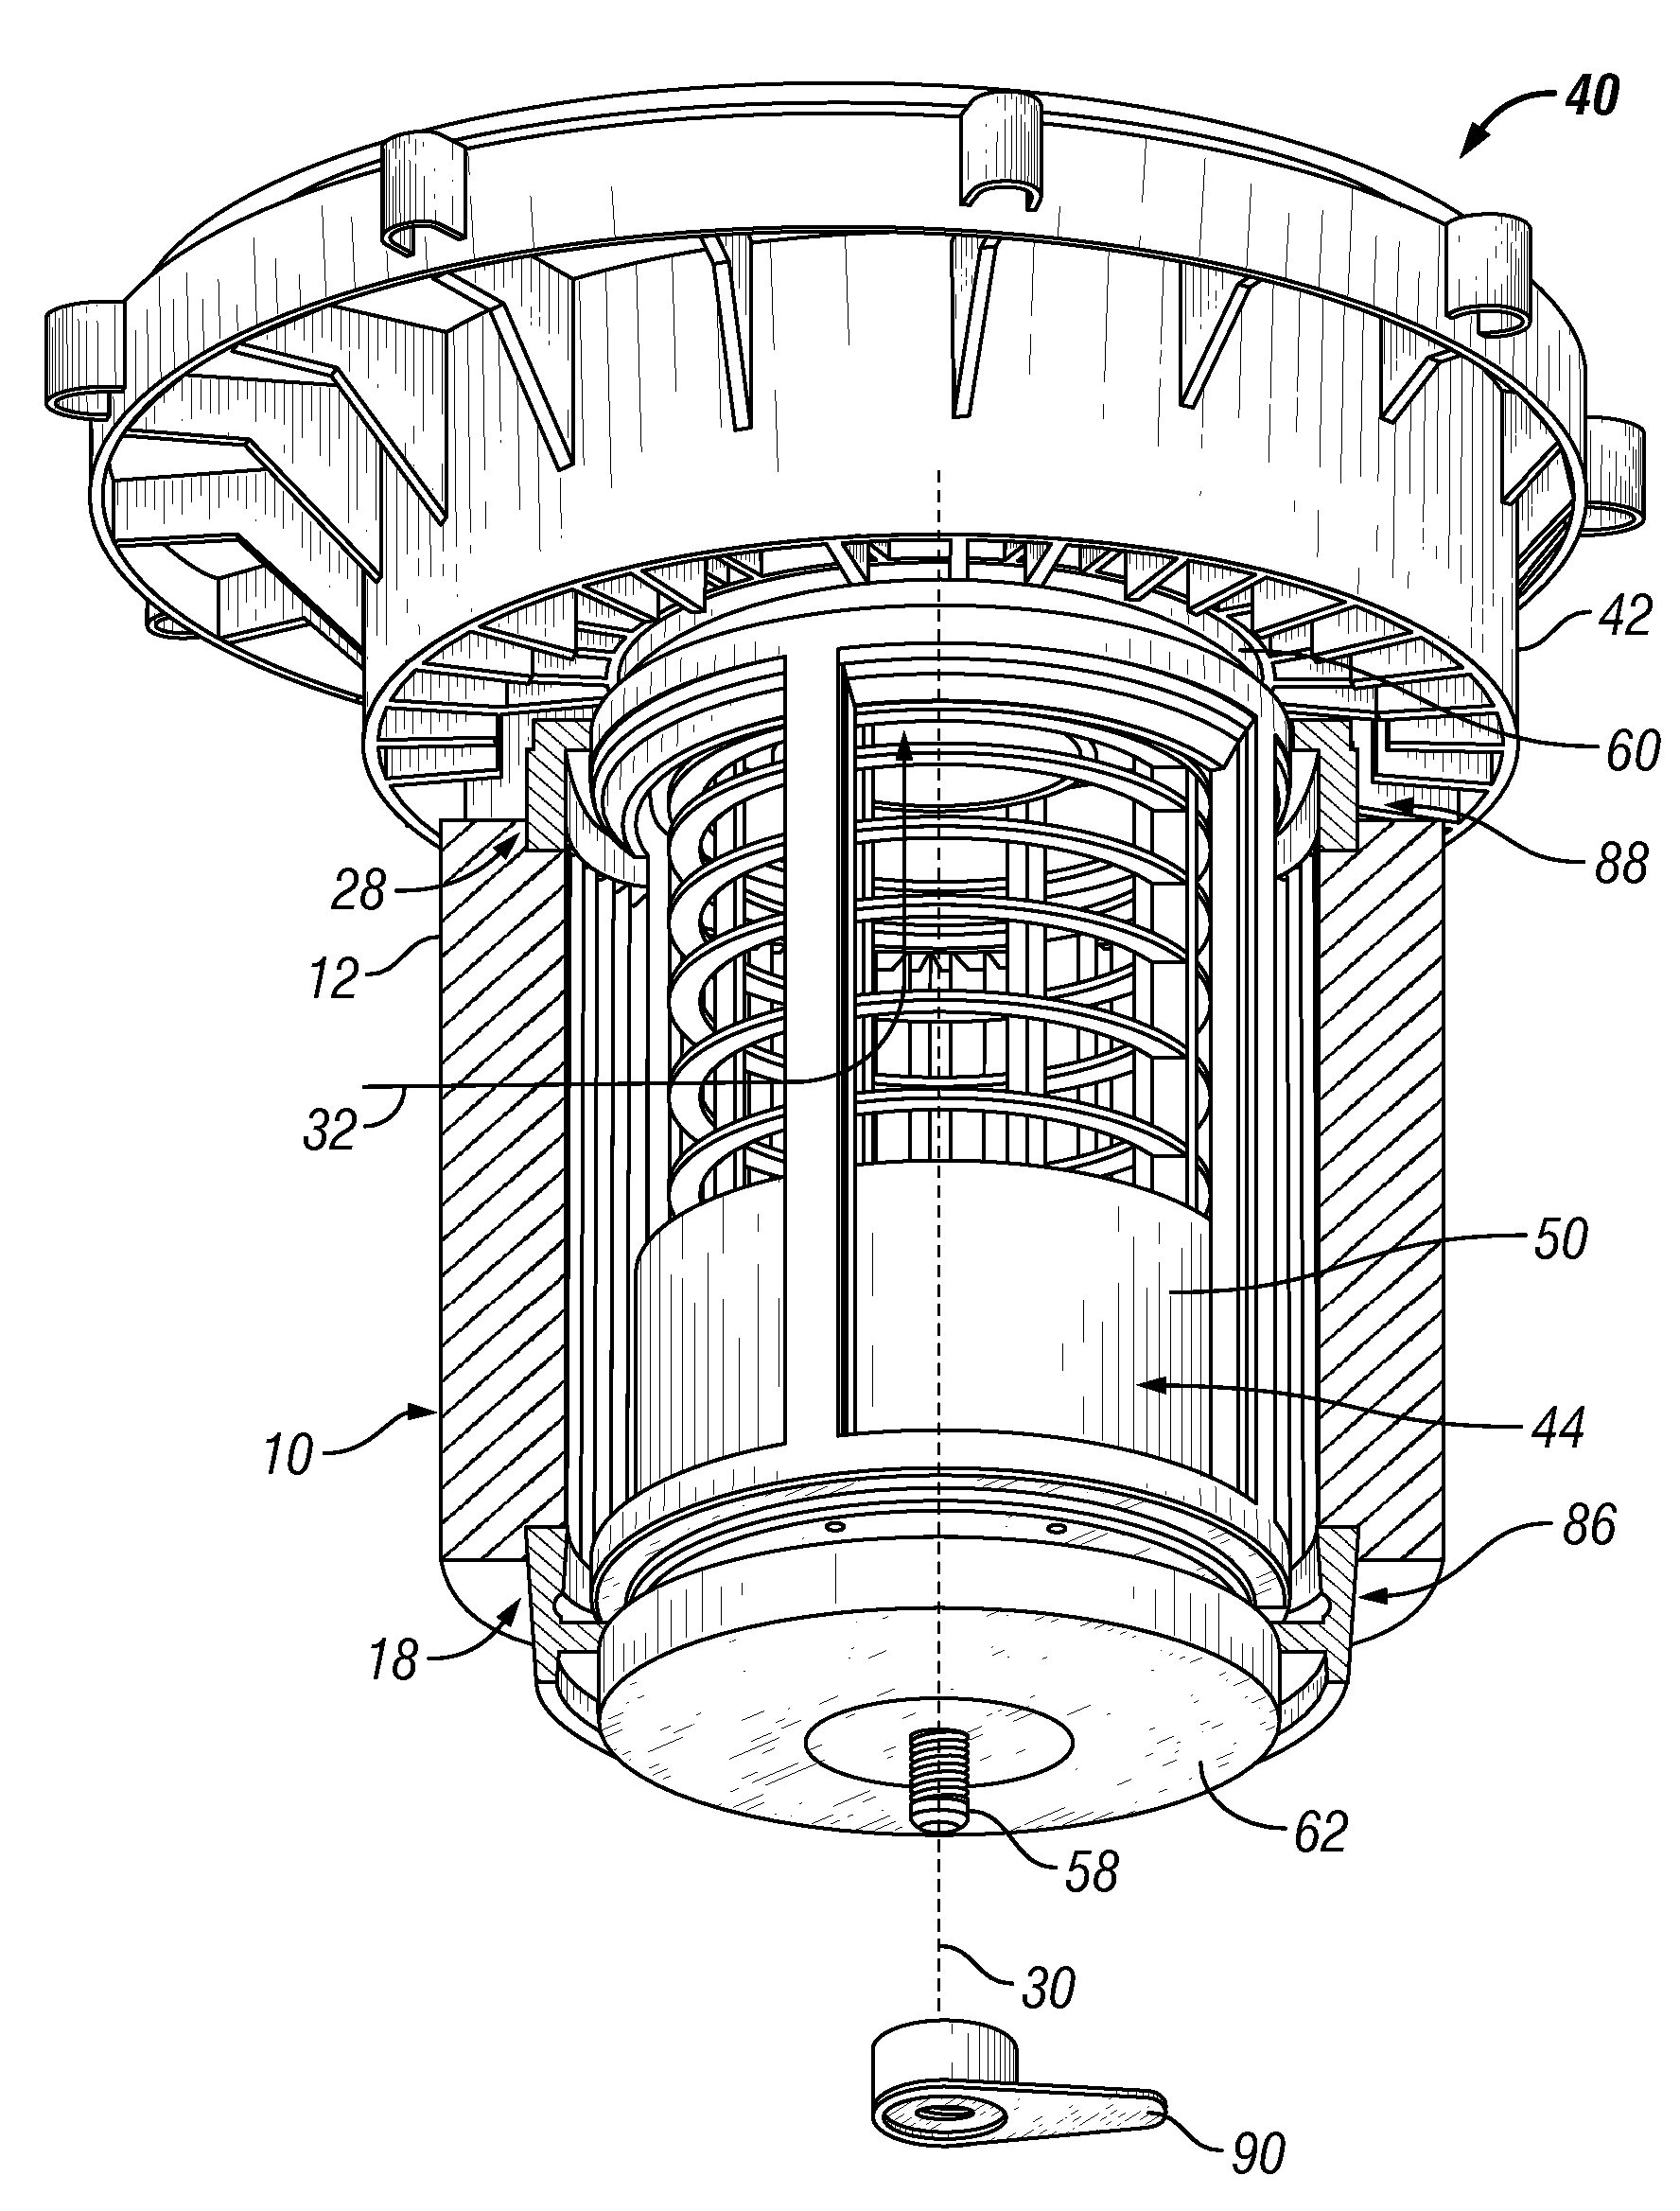 Filter and system for improved sealing on a vacuum cleaner